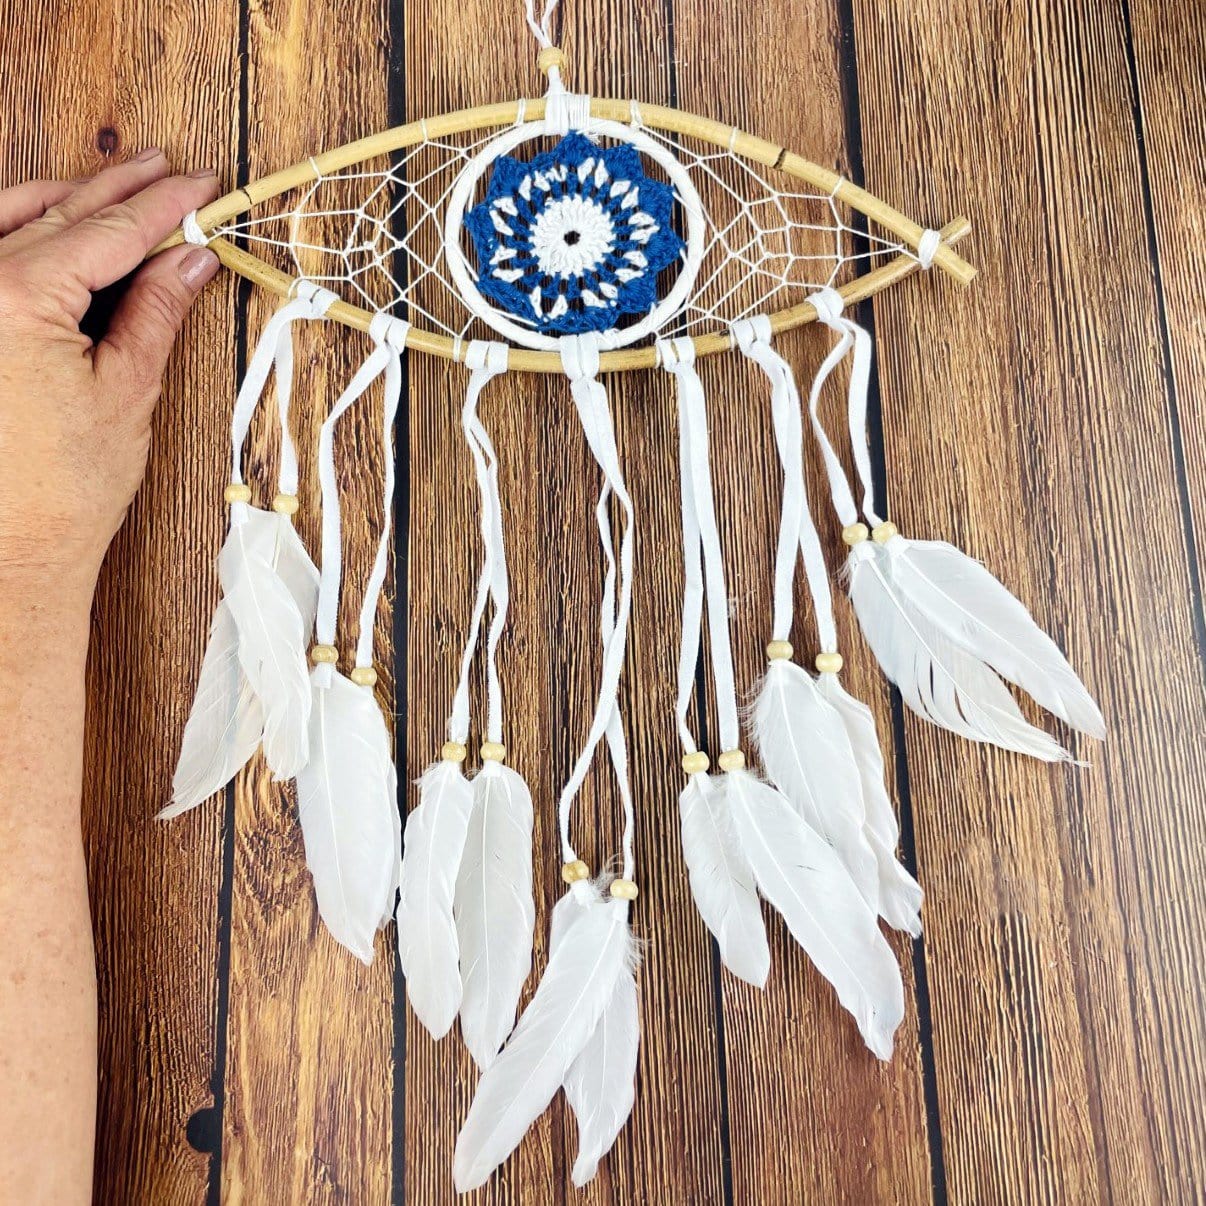 White Dream Catcher with  Blue All Seeing Eye Pattern  next to hand for size reference